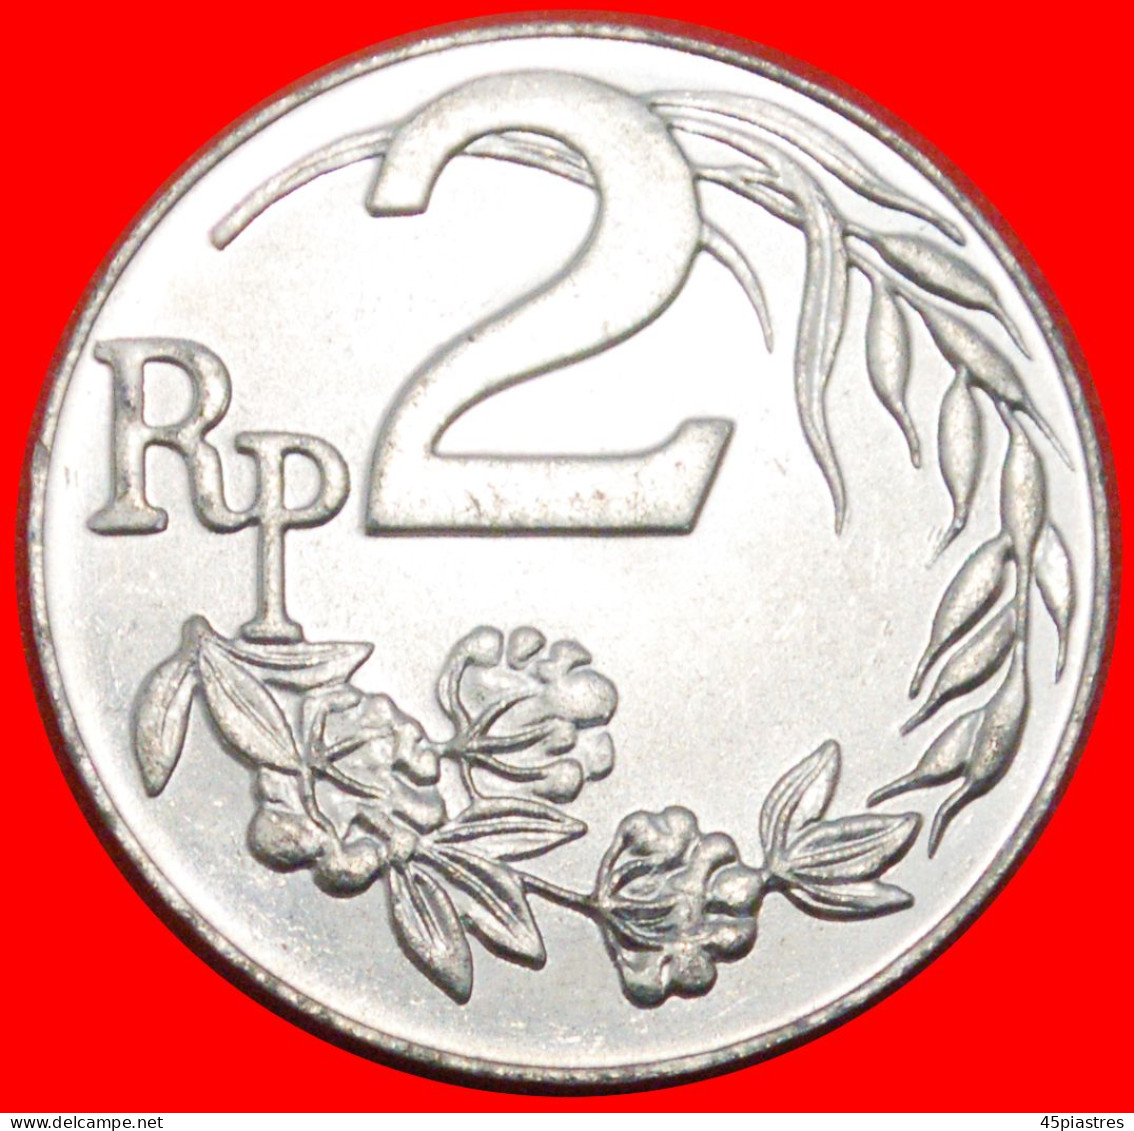 * RICE AND COTTON: INDONESIA  2 RUPIAH 1970 UNC MINT LUSTRE! · LOW START ·  NO RESERVE! - Indonesia